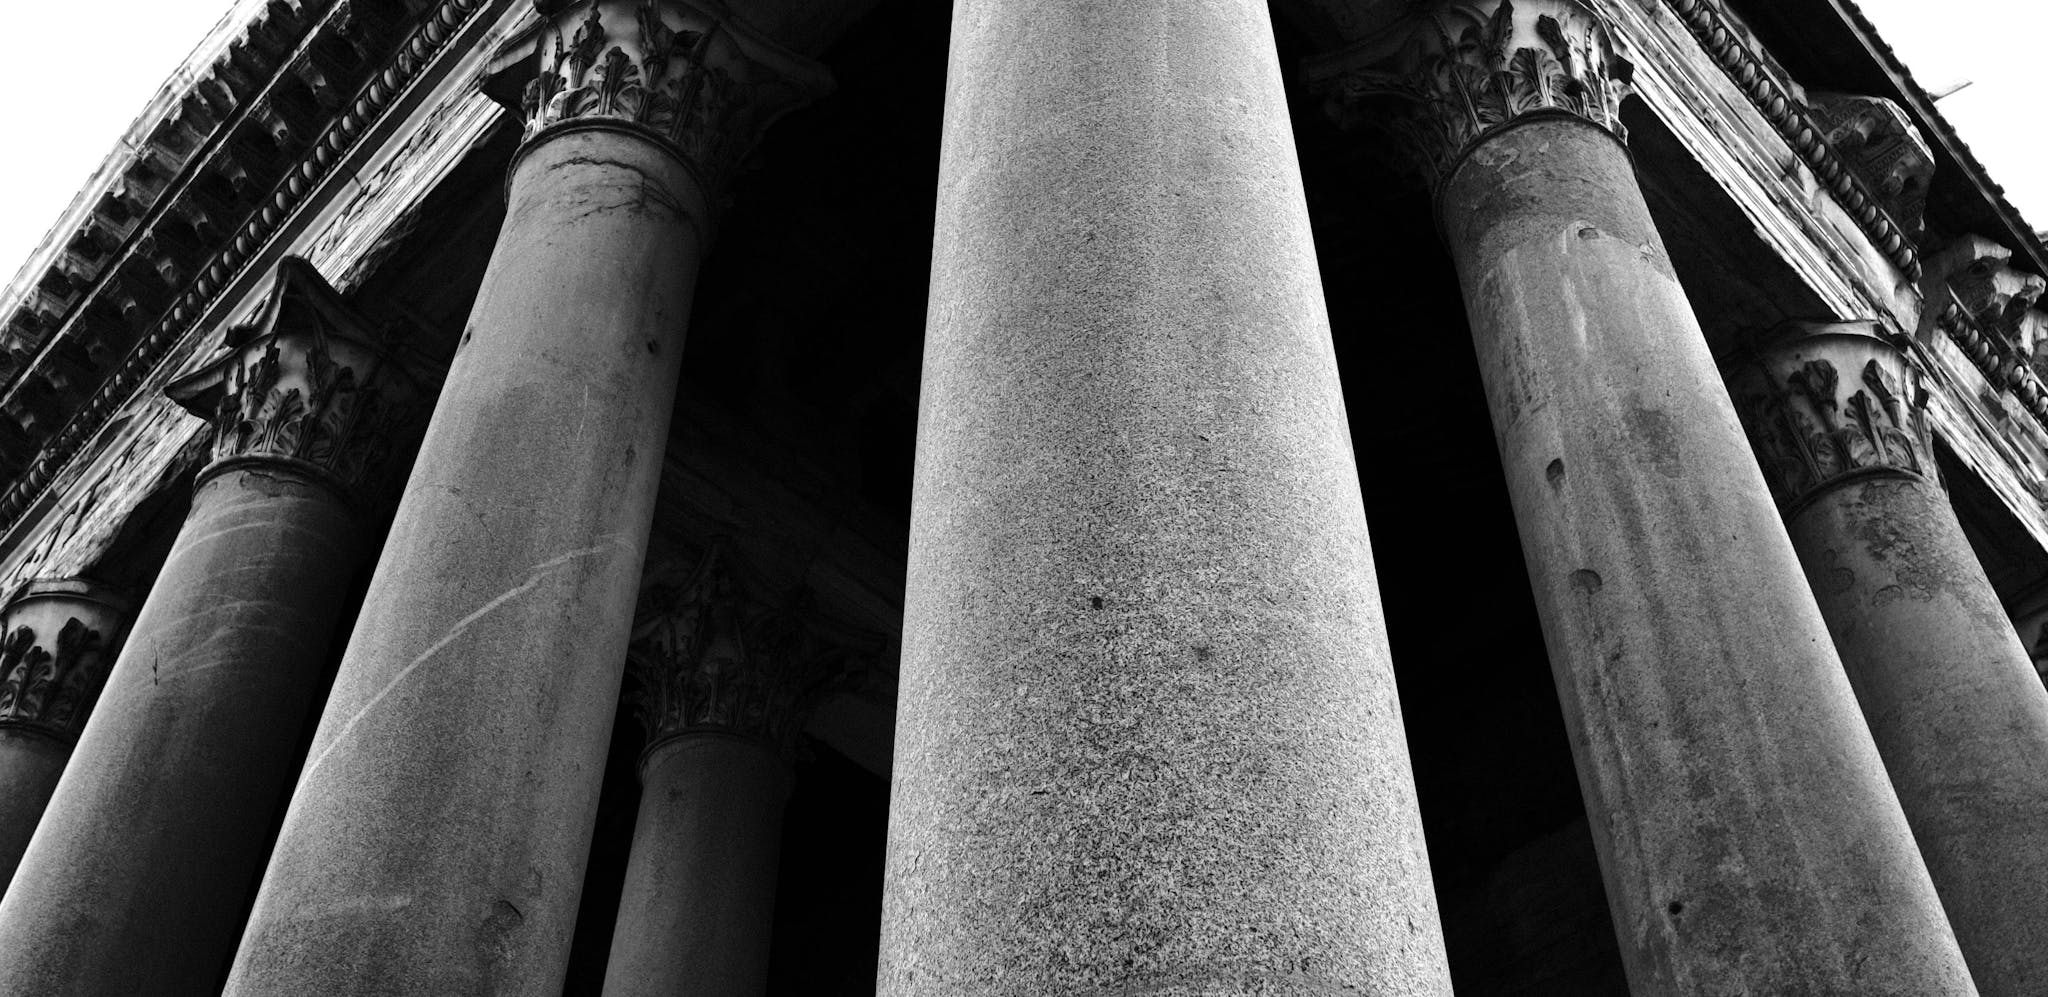 Black and white image taken looking up at the stone columns of a classical building